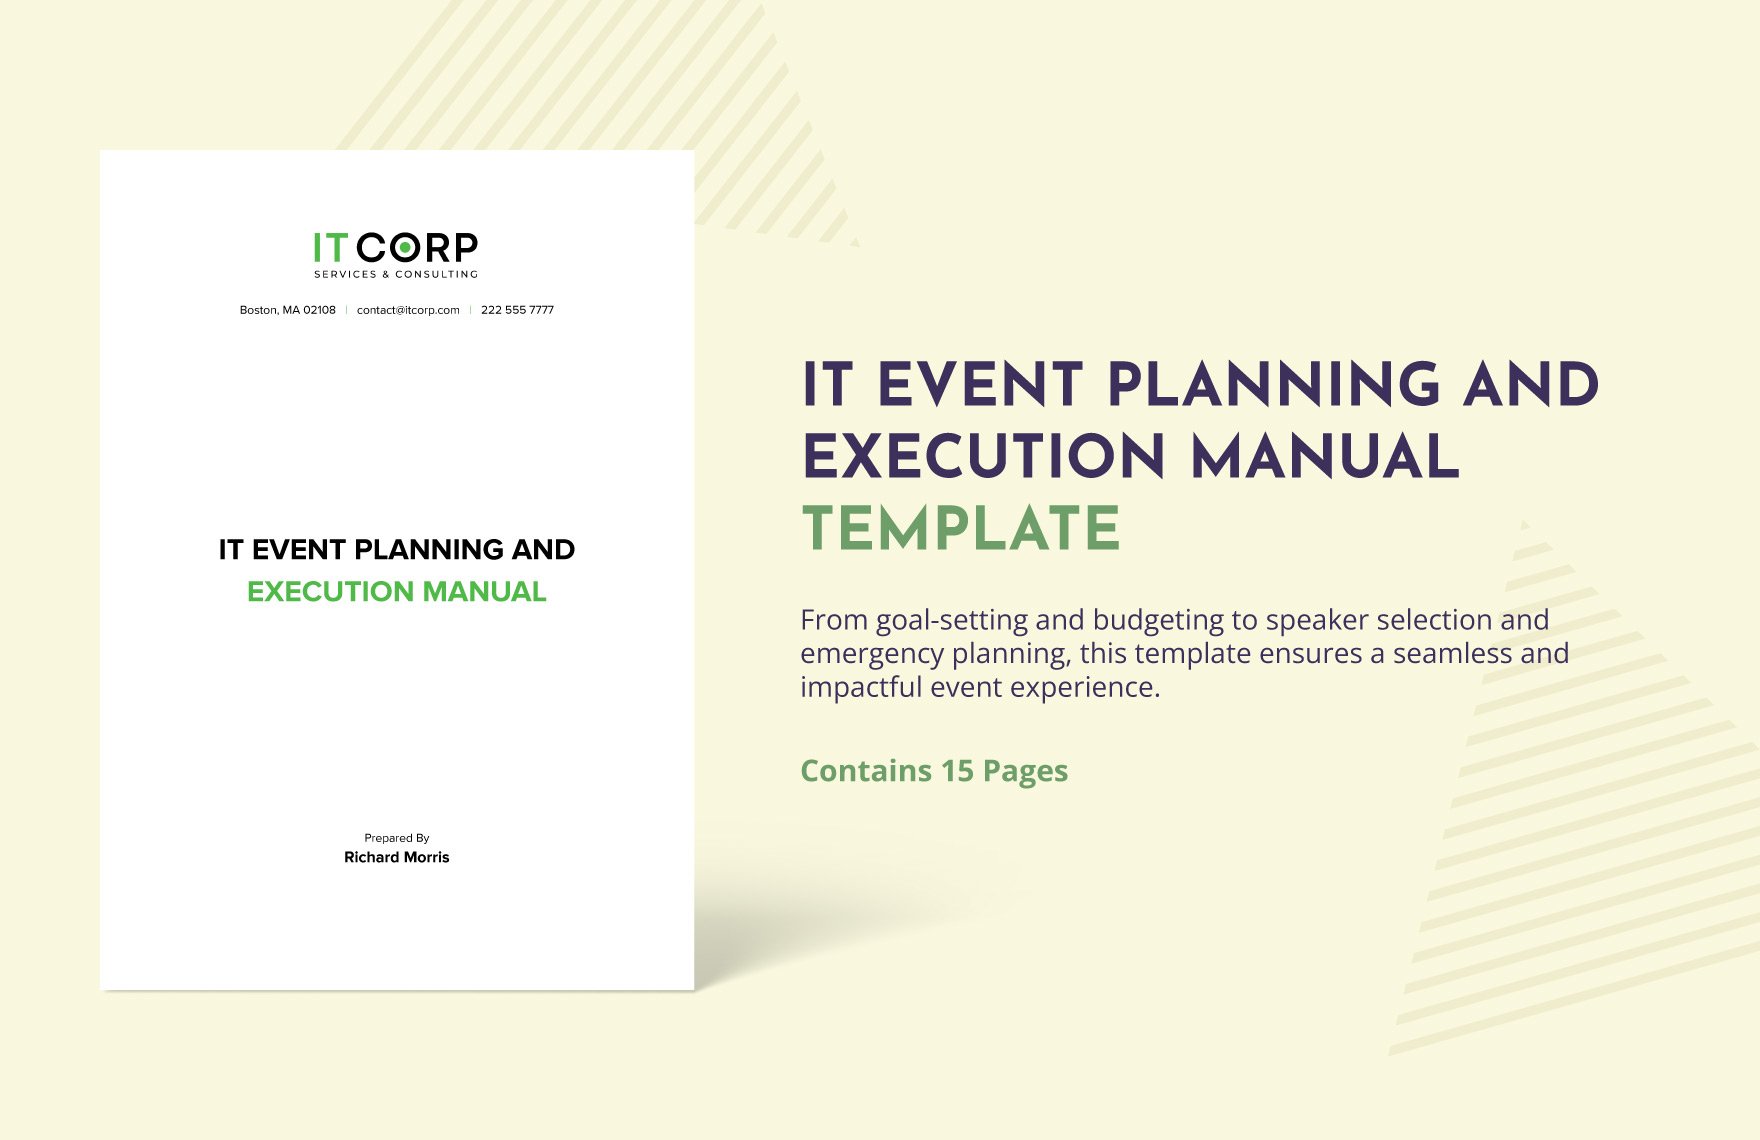 IT Event Planning and Execution Manual Template in Word, Google Docs, PDF